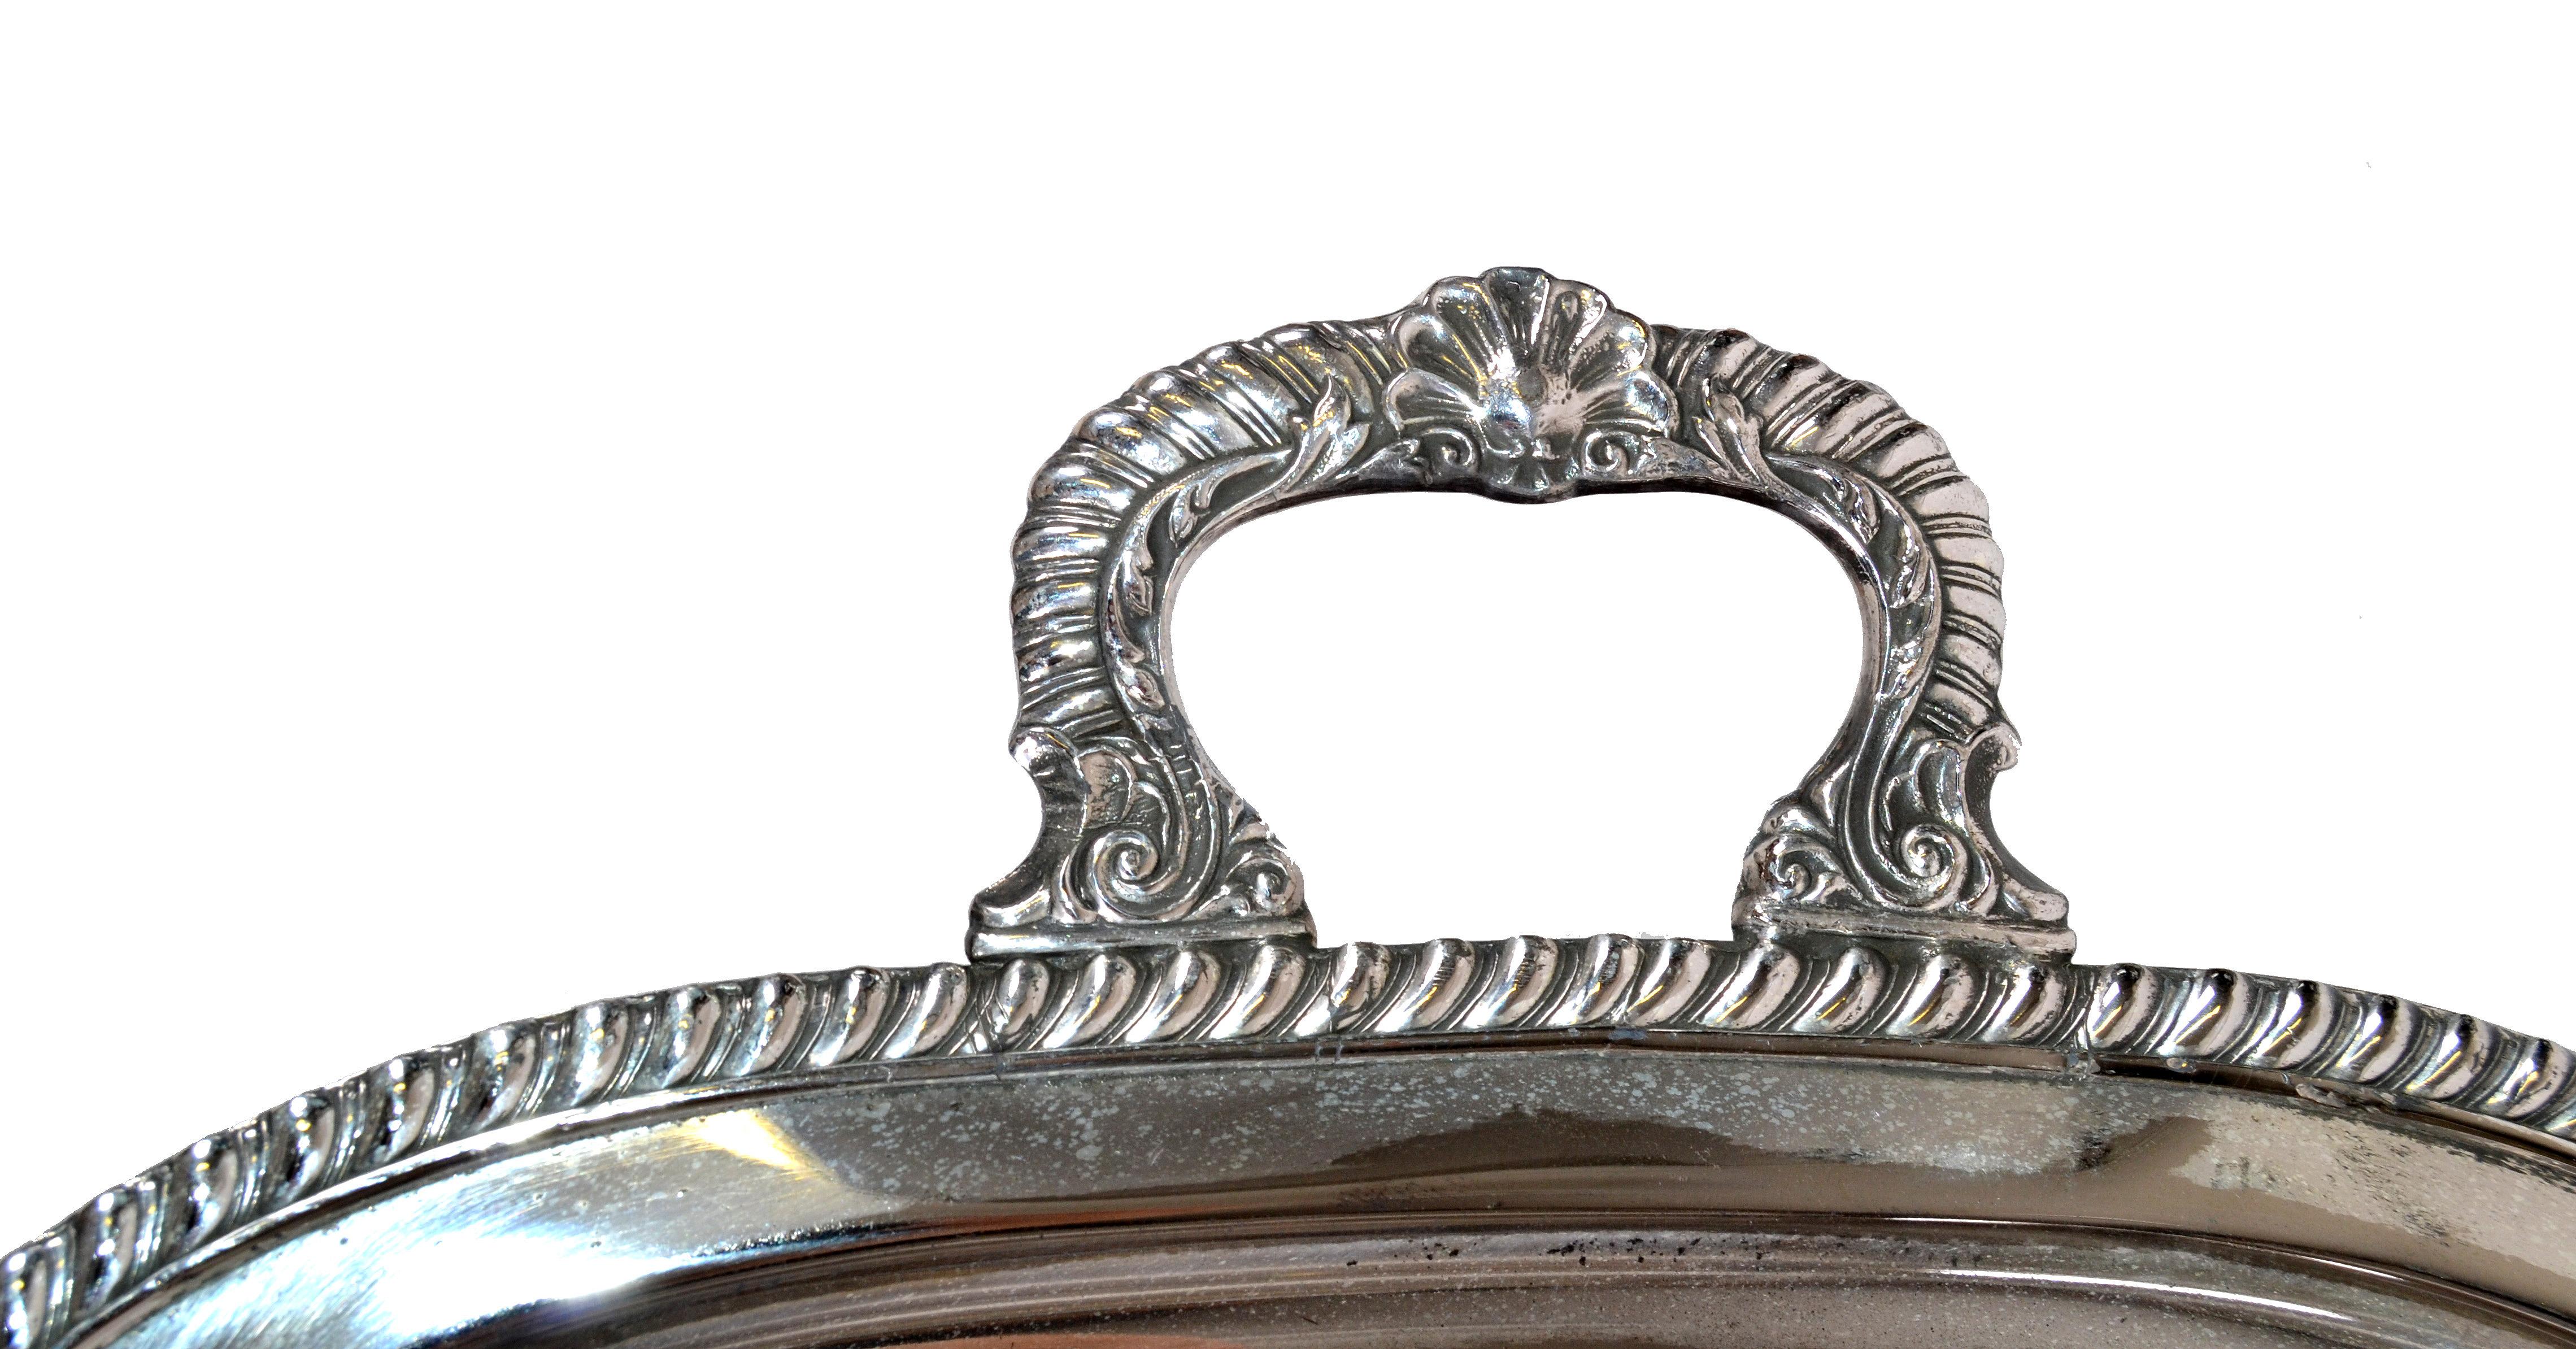 antique silver serving trays with handles